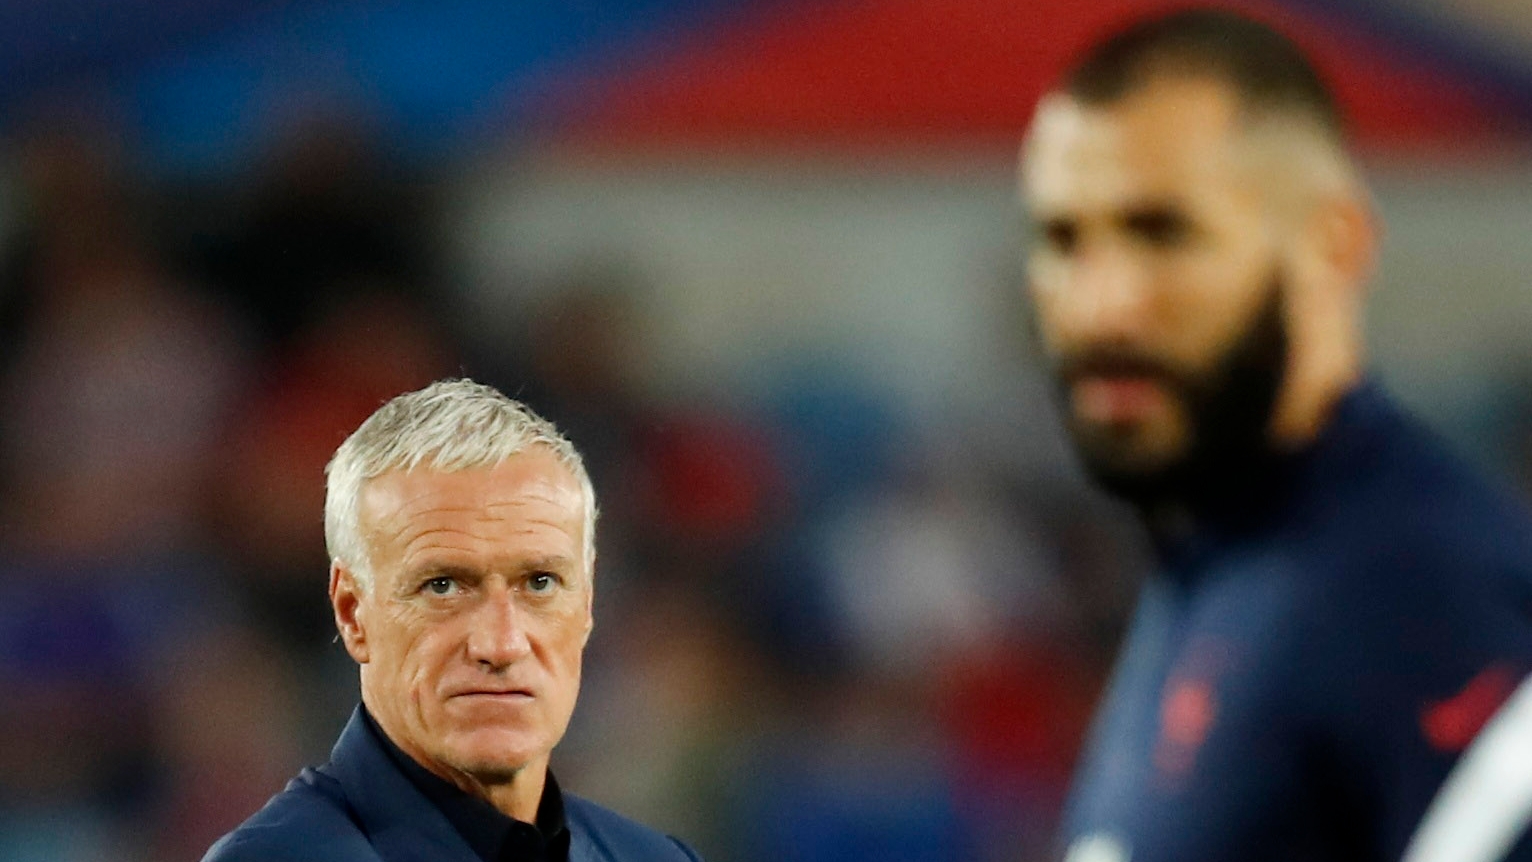 Soccer Football - World Cup - UEFA Qualifiers - Group D - France v Bosnia and Herzegovina - Stade de la Meinau, Strasbourg, France - September 1, 2021 France coach Didier Deschamps looks on before the match with France's Karim Benzema seen in the foreground REUTERS/ Gonzalo Fuentes